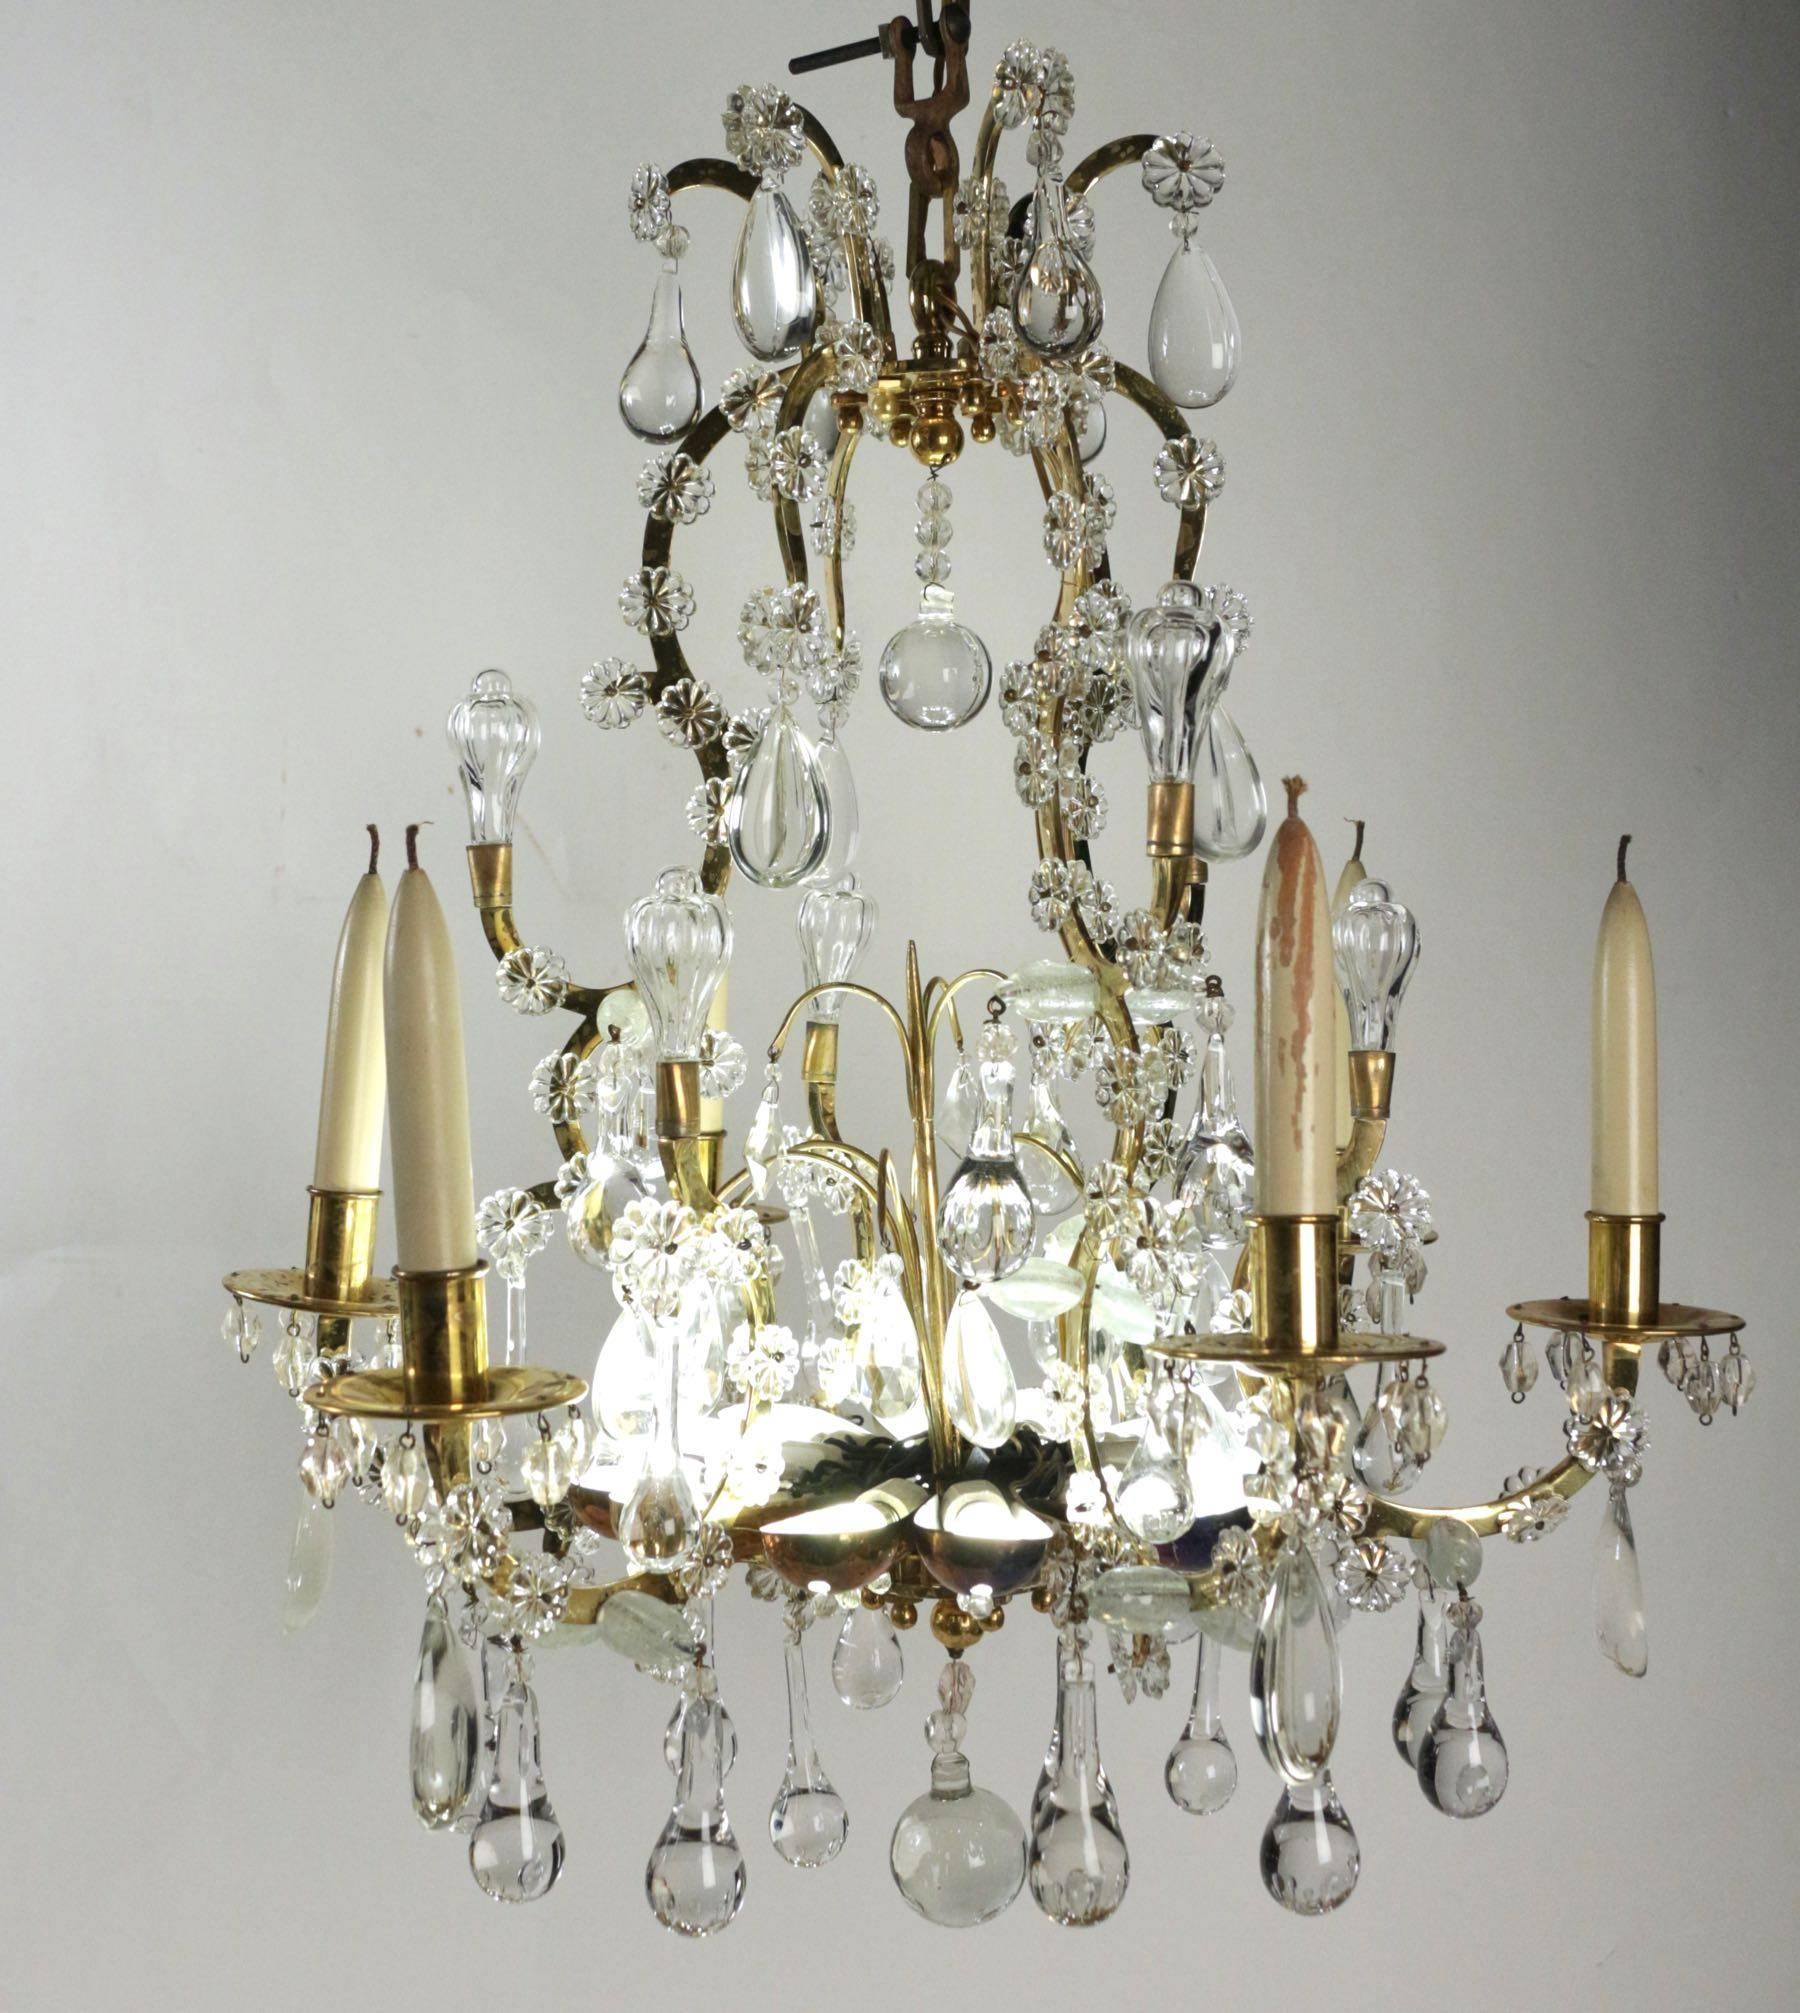 Chandelier in the style of Louis XV with crystal from the 19th century beautiful workmanship and detail with one indirect light.